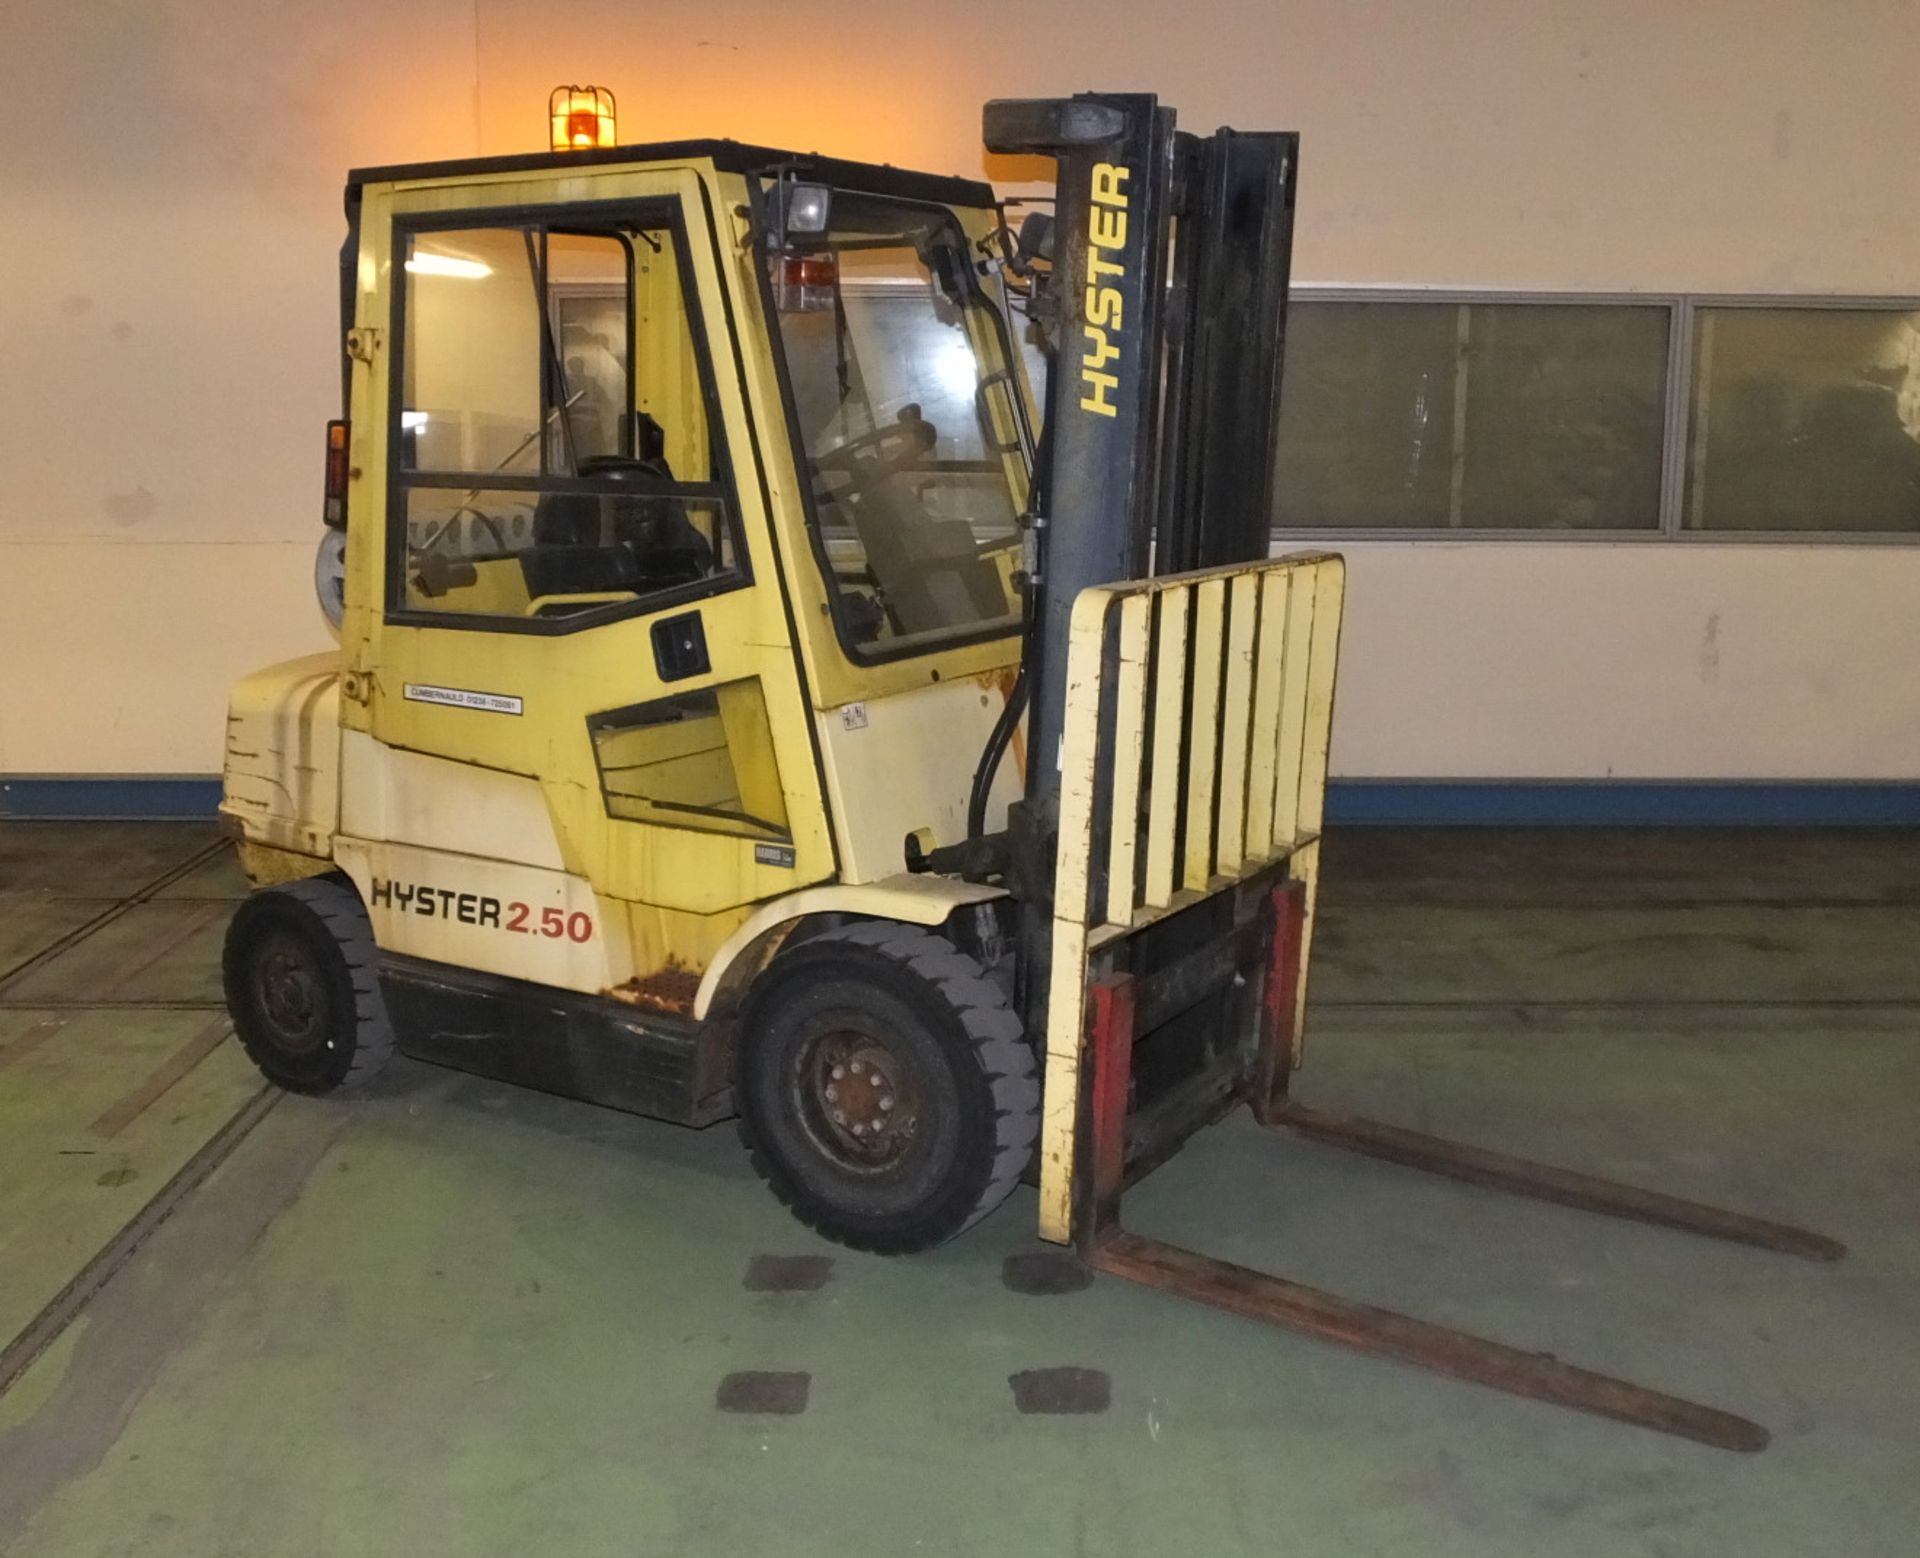 Gas Powered Counterbalance forklift - Hyster H2.50XM - 1999 - SWL 250 - New LOLER Certificate